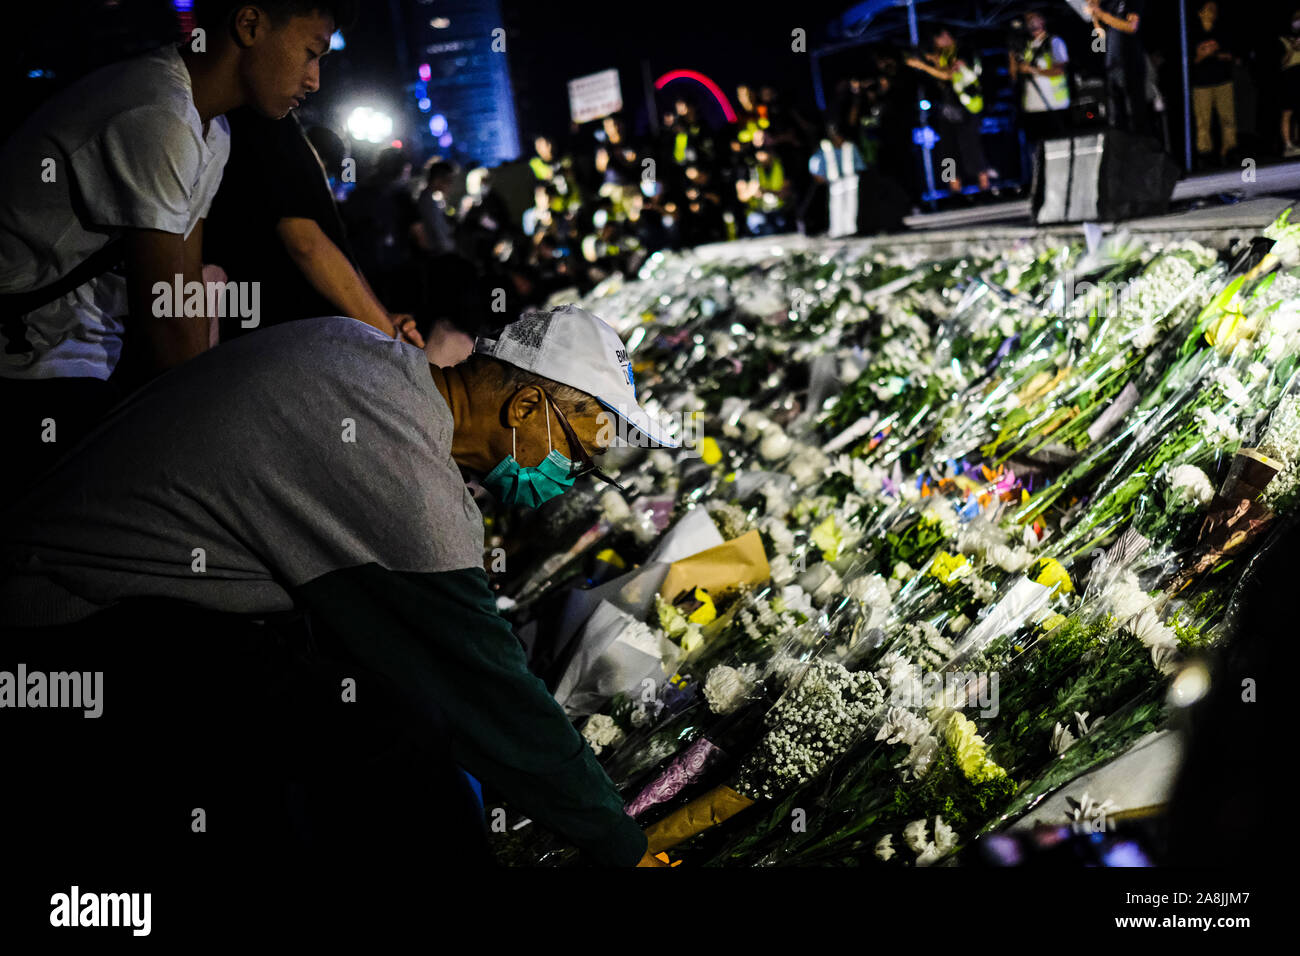 Demonstrators placing flowers at the memorial during the rally.Memorial rally at Tamar Park in Hong Kong to mourn the death of a 22 years old university student, Alex Chow Tsz Lok who died from a serious brain injury during a fall on November 4th as police skirmished with demonstrators last weekend. He was left in critical condition and died after suffering a cardiac arrest. Stock Photo